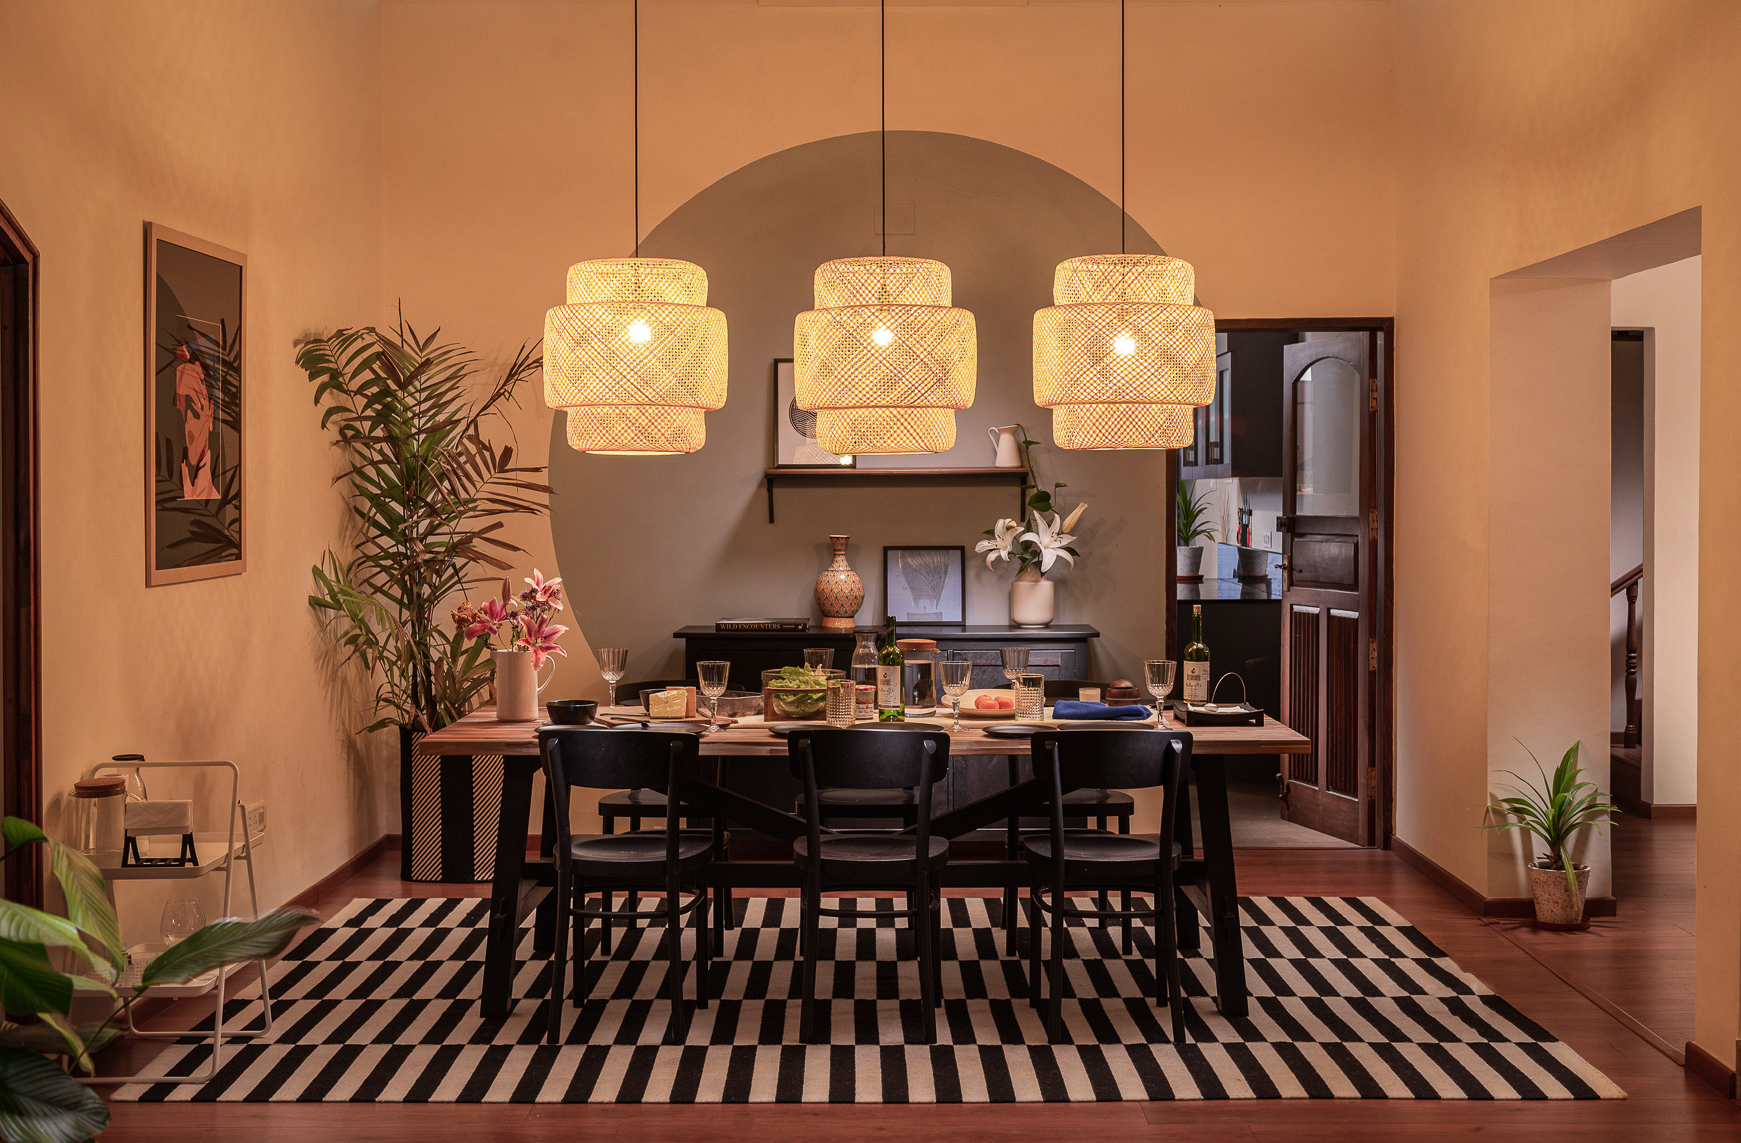 Ikea Dining Room with Wicker Pendant Lights